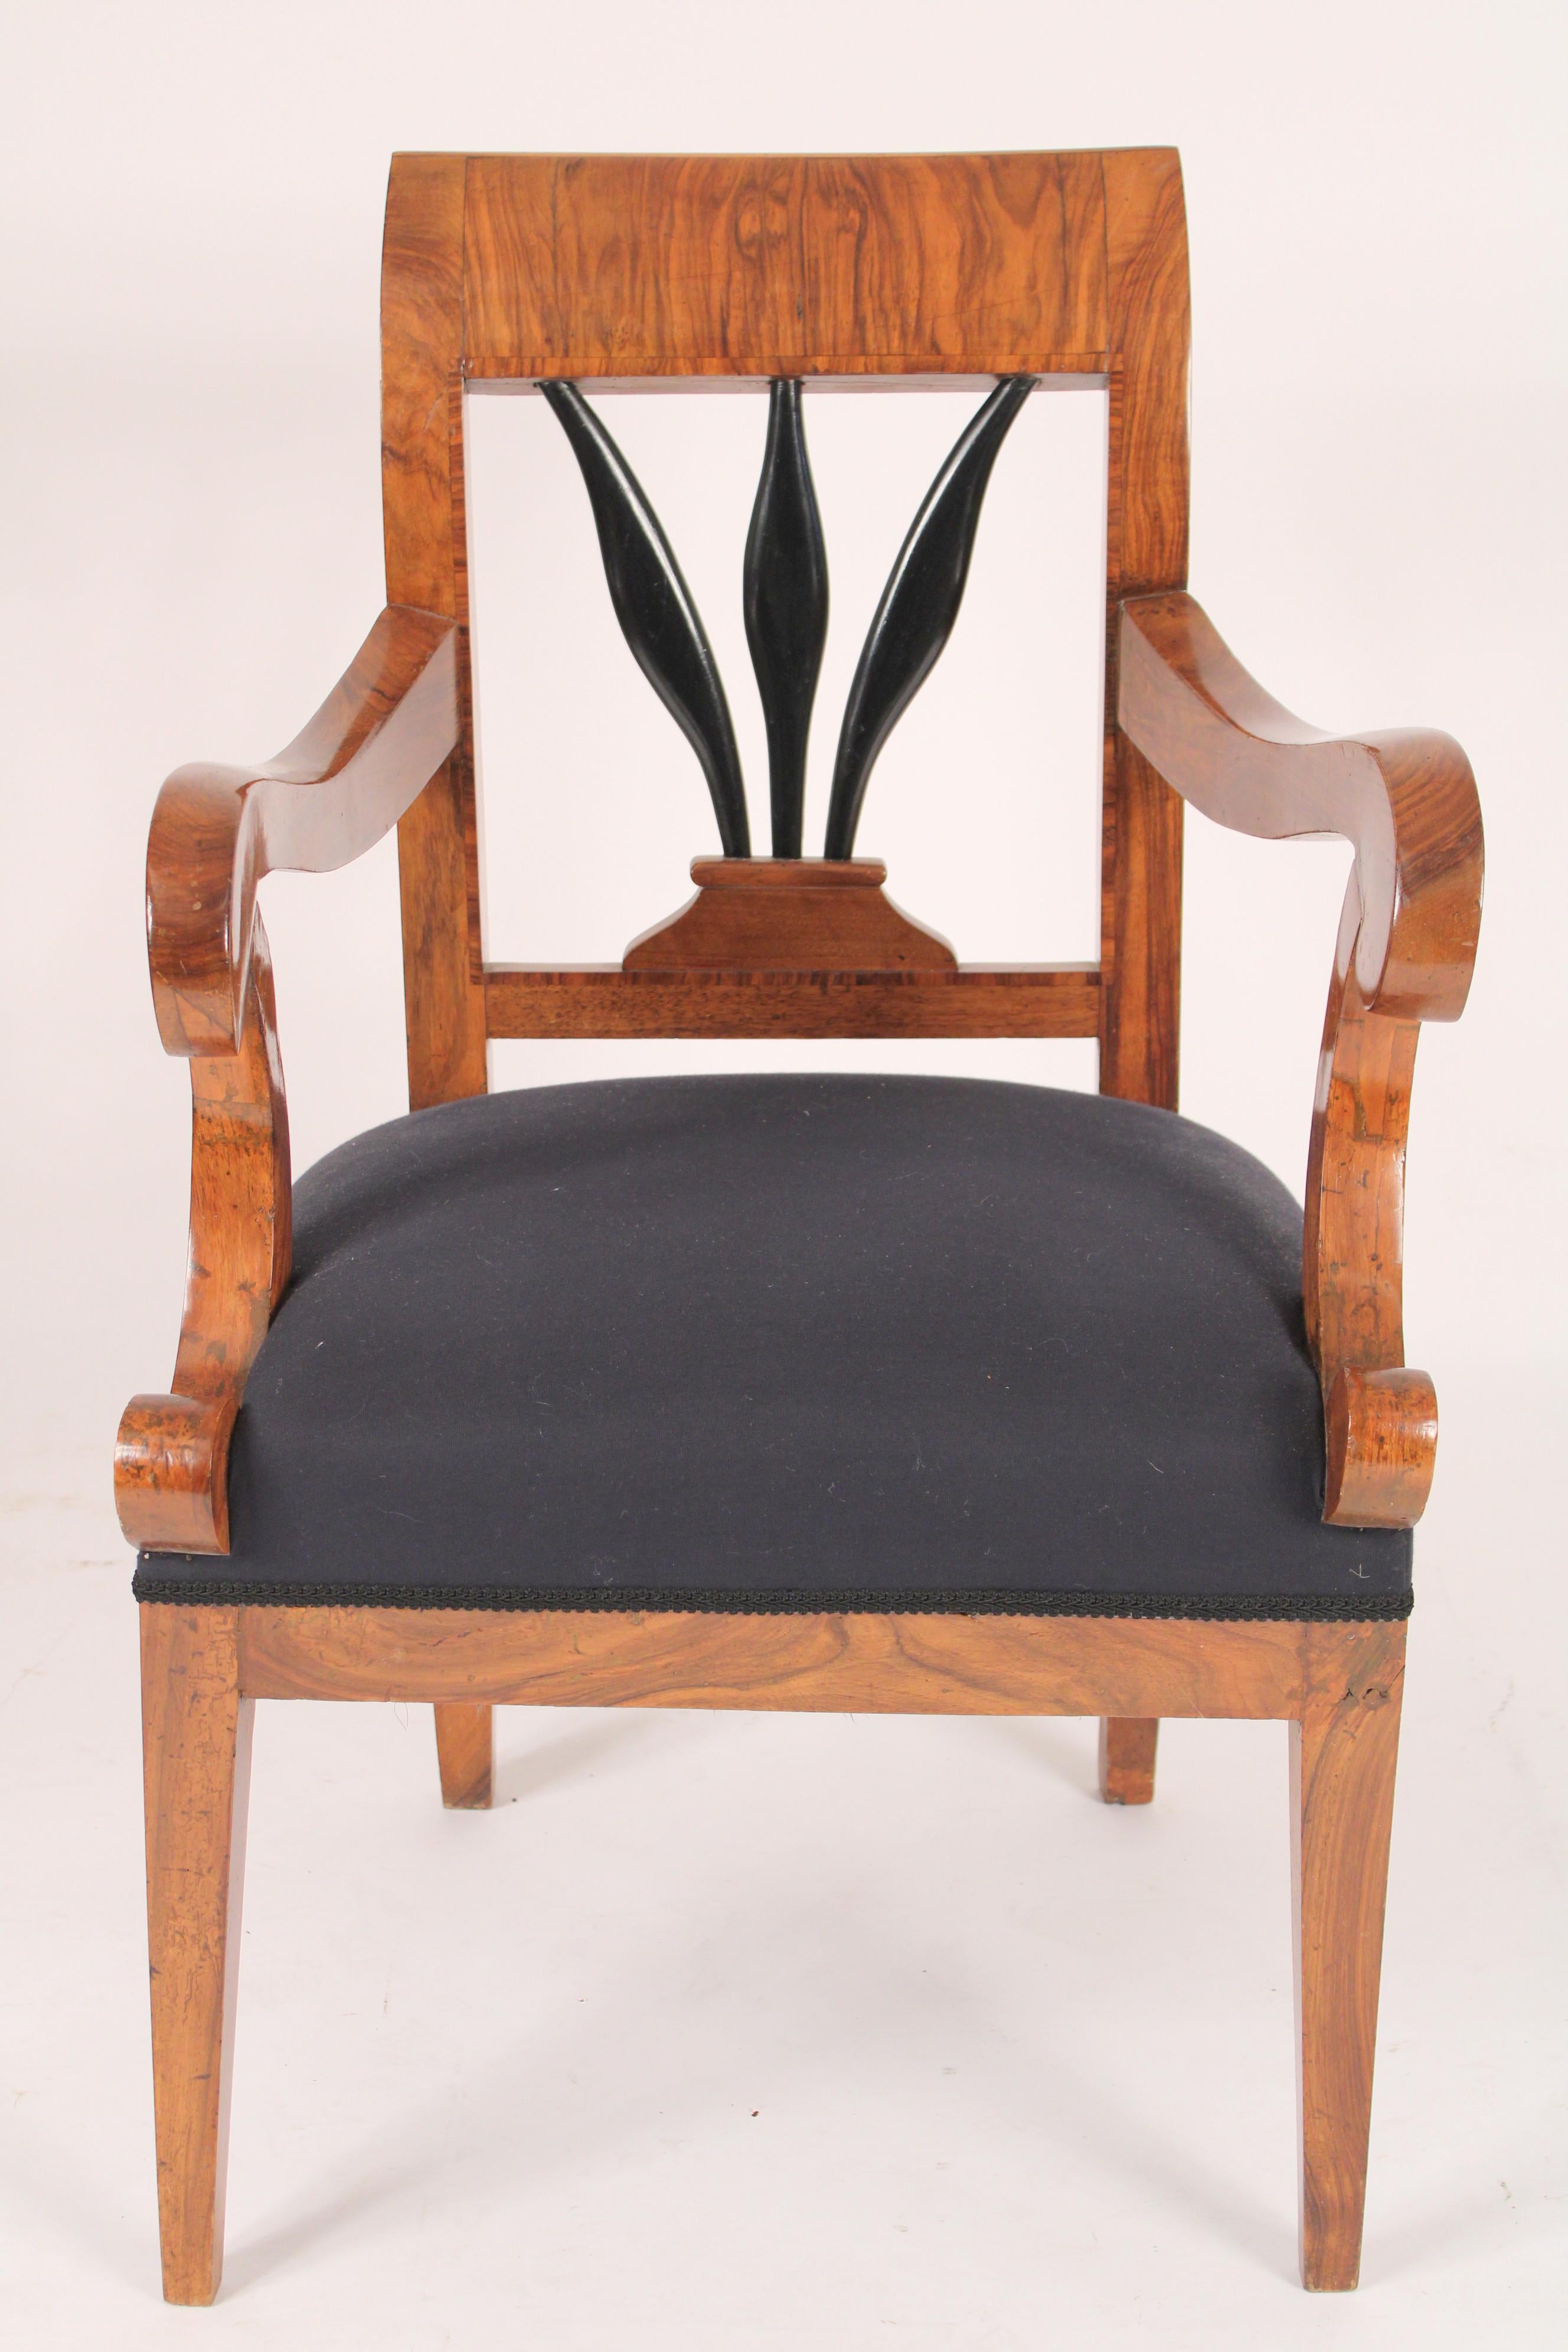 Biedermeier burl walnut armchair, circa 1835. With a nicely figuered burl walnut crest rail, ebonized wheat sheath back splat, s shaped arms resting on c scrolled arm supports on square tapered legs.